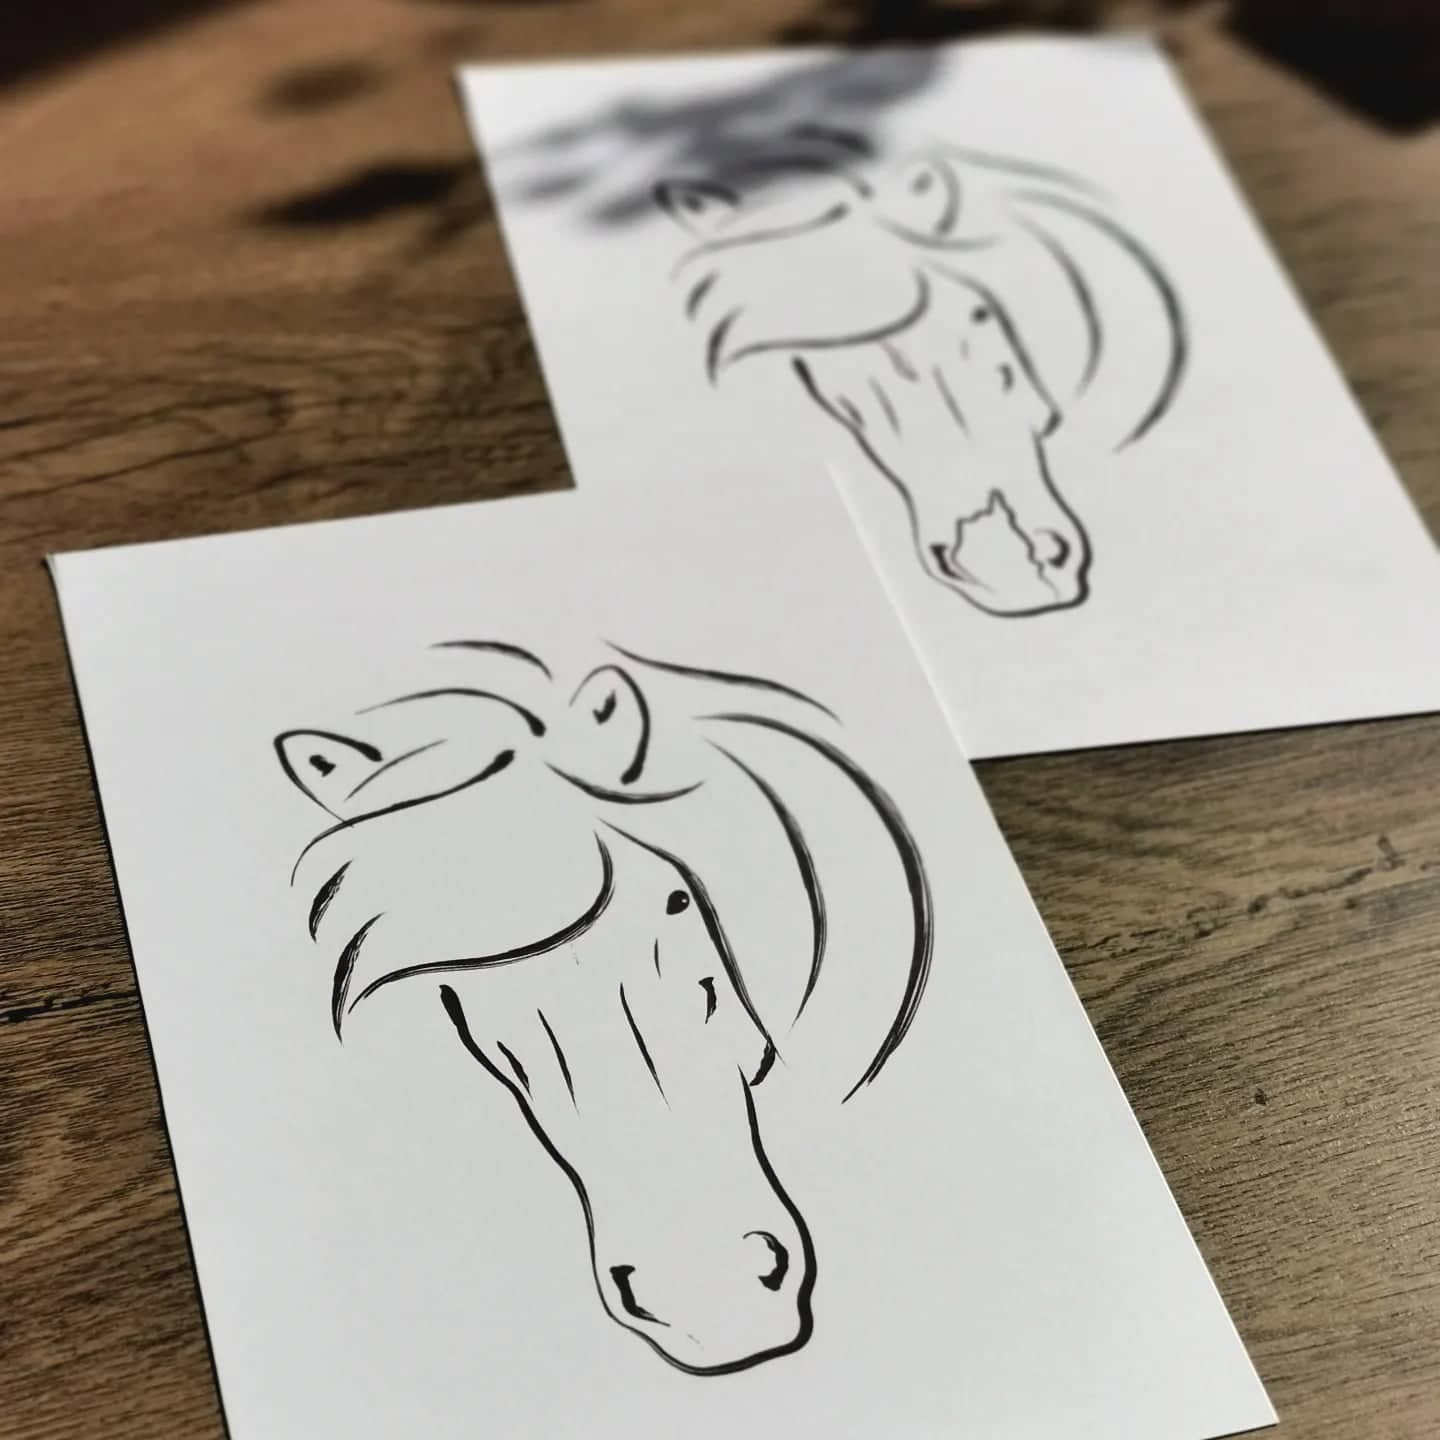 Individuelle Zeichnung mit und ohne Abzeichen / Unique drawing with and without markings of the horse